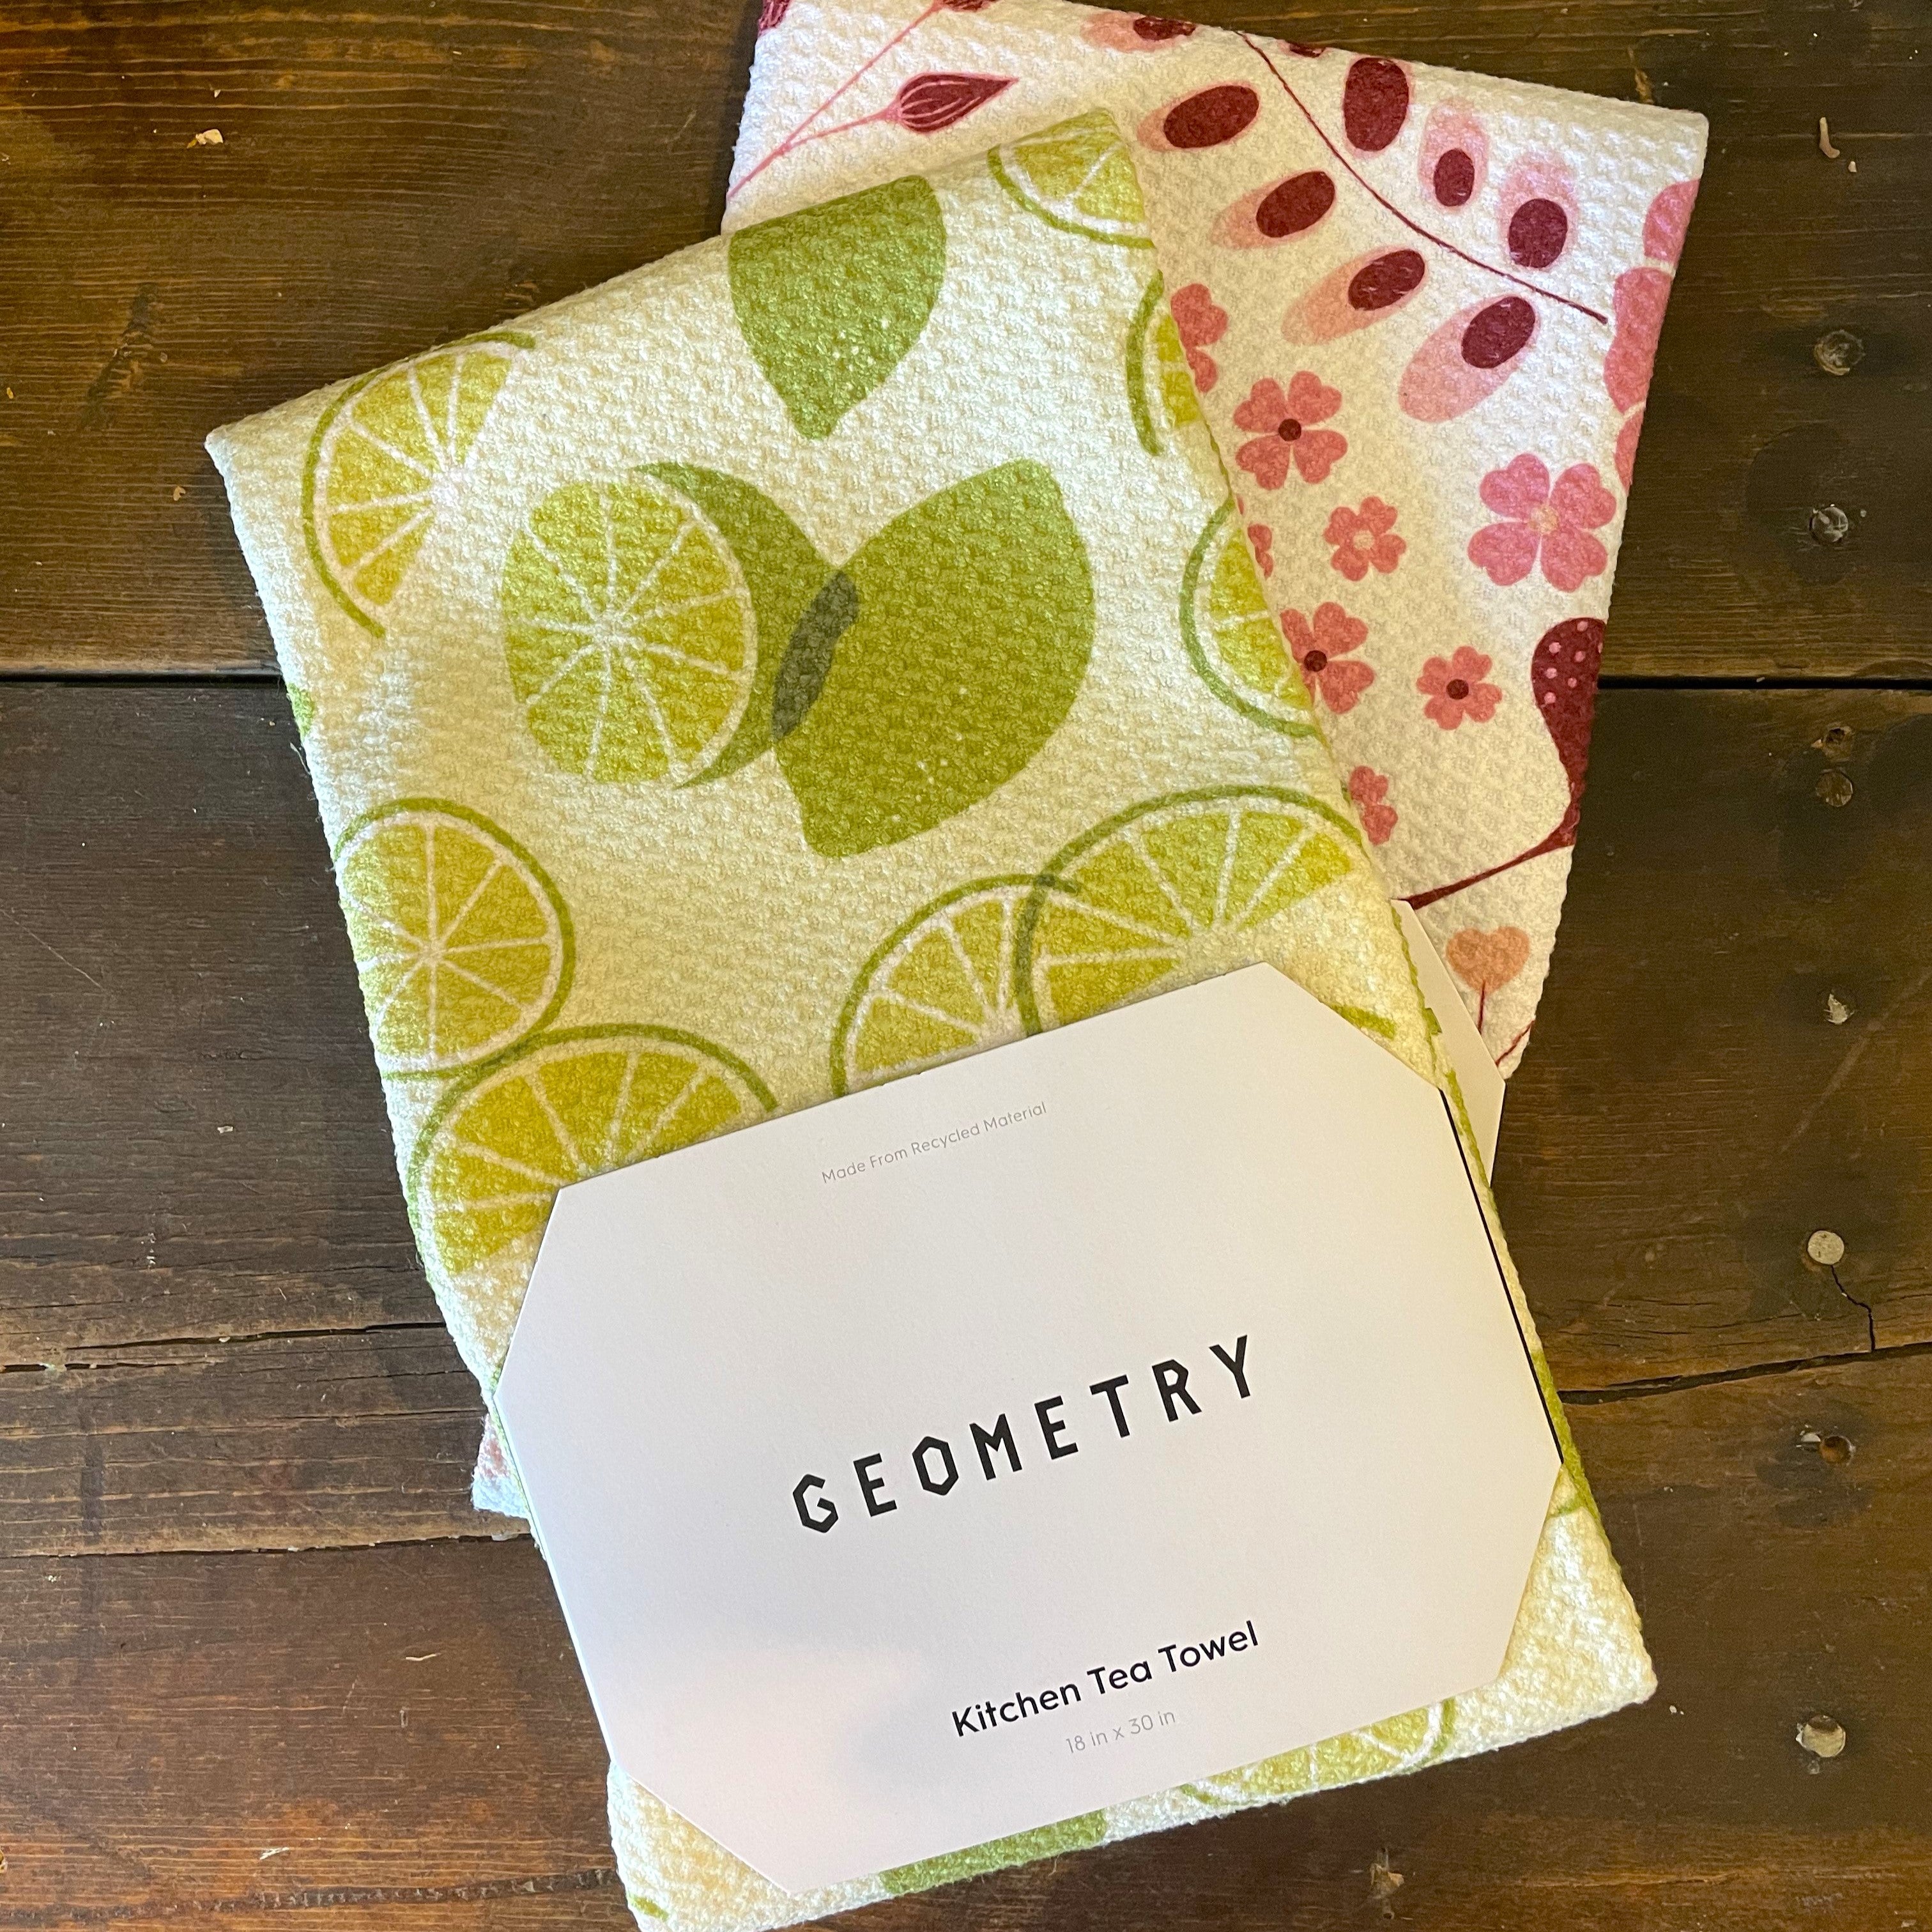 Geometry Dish Towels Microfiber Kitchen Rags for Cleaning Counters Animal Water Absorbent Repeatable Dishwasher Cleaning Wipe Hanging Towel Dishcloth